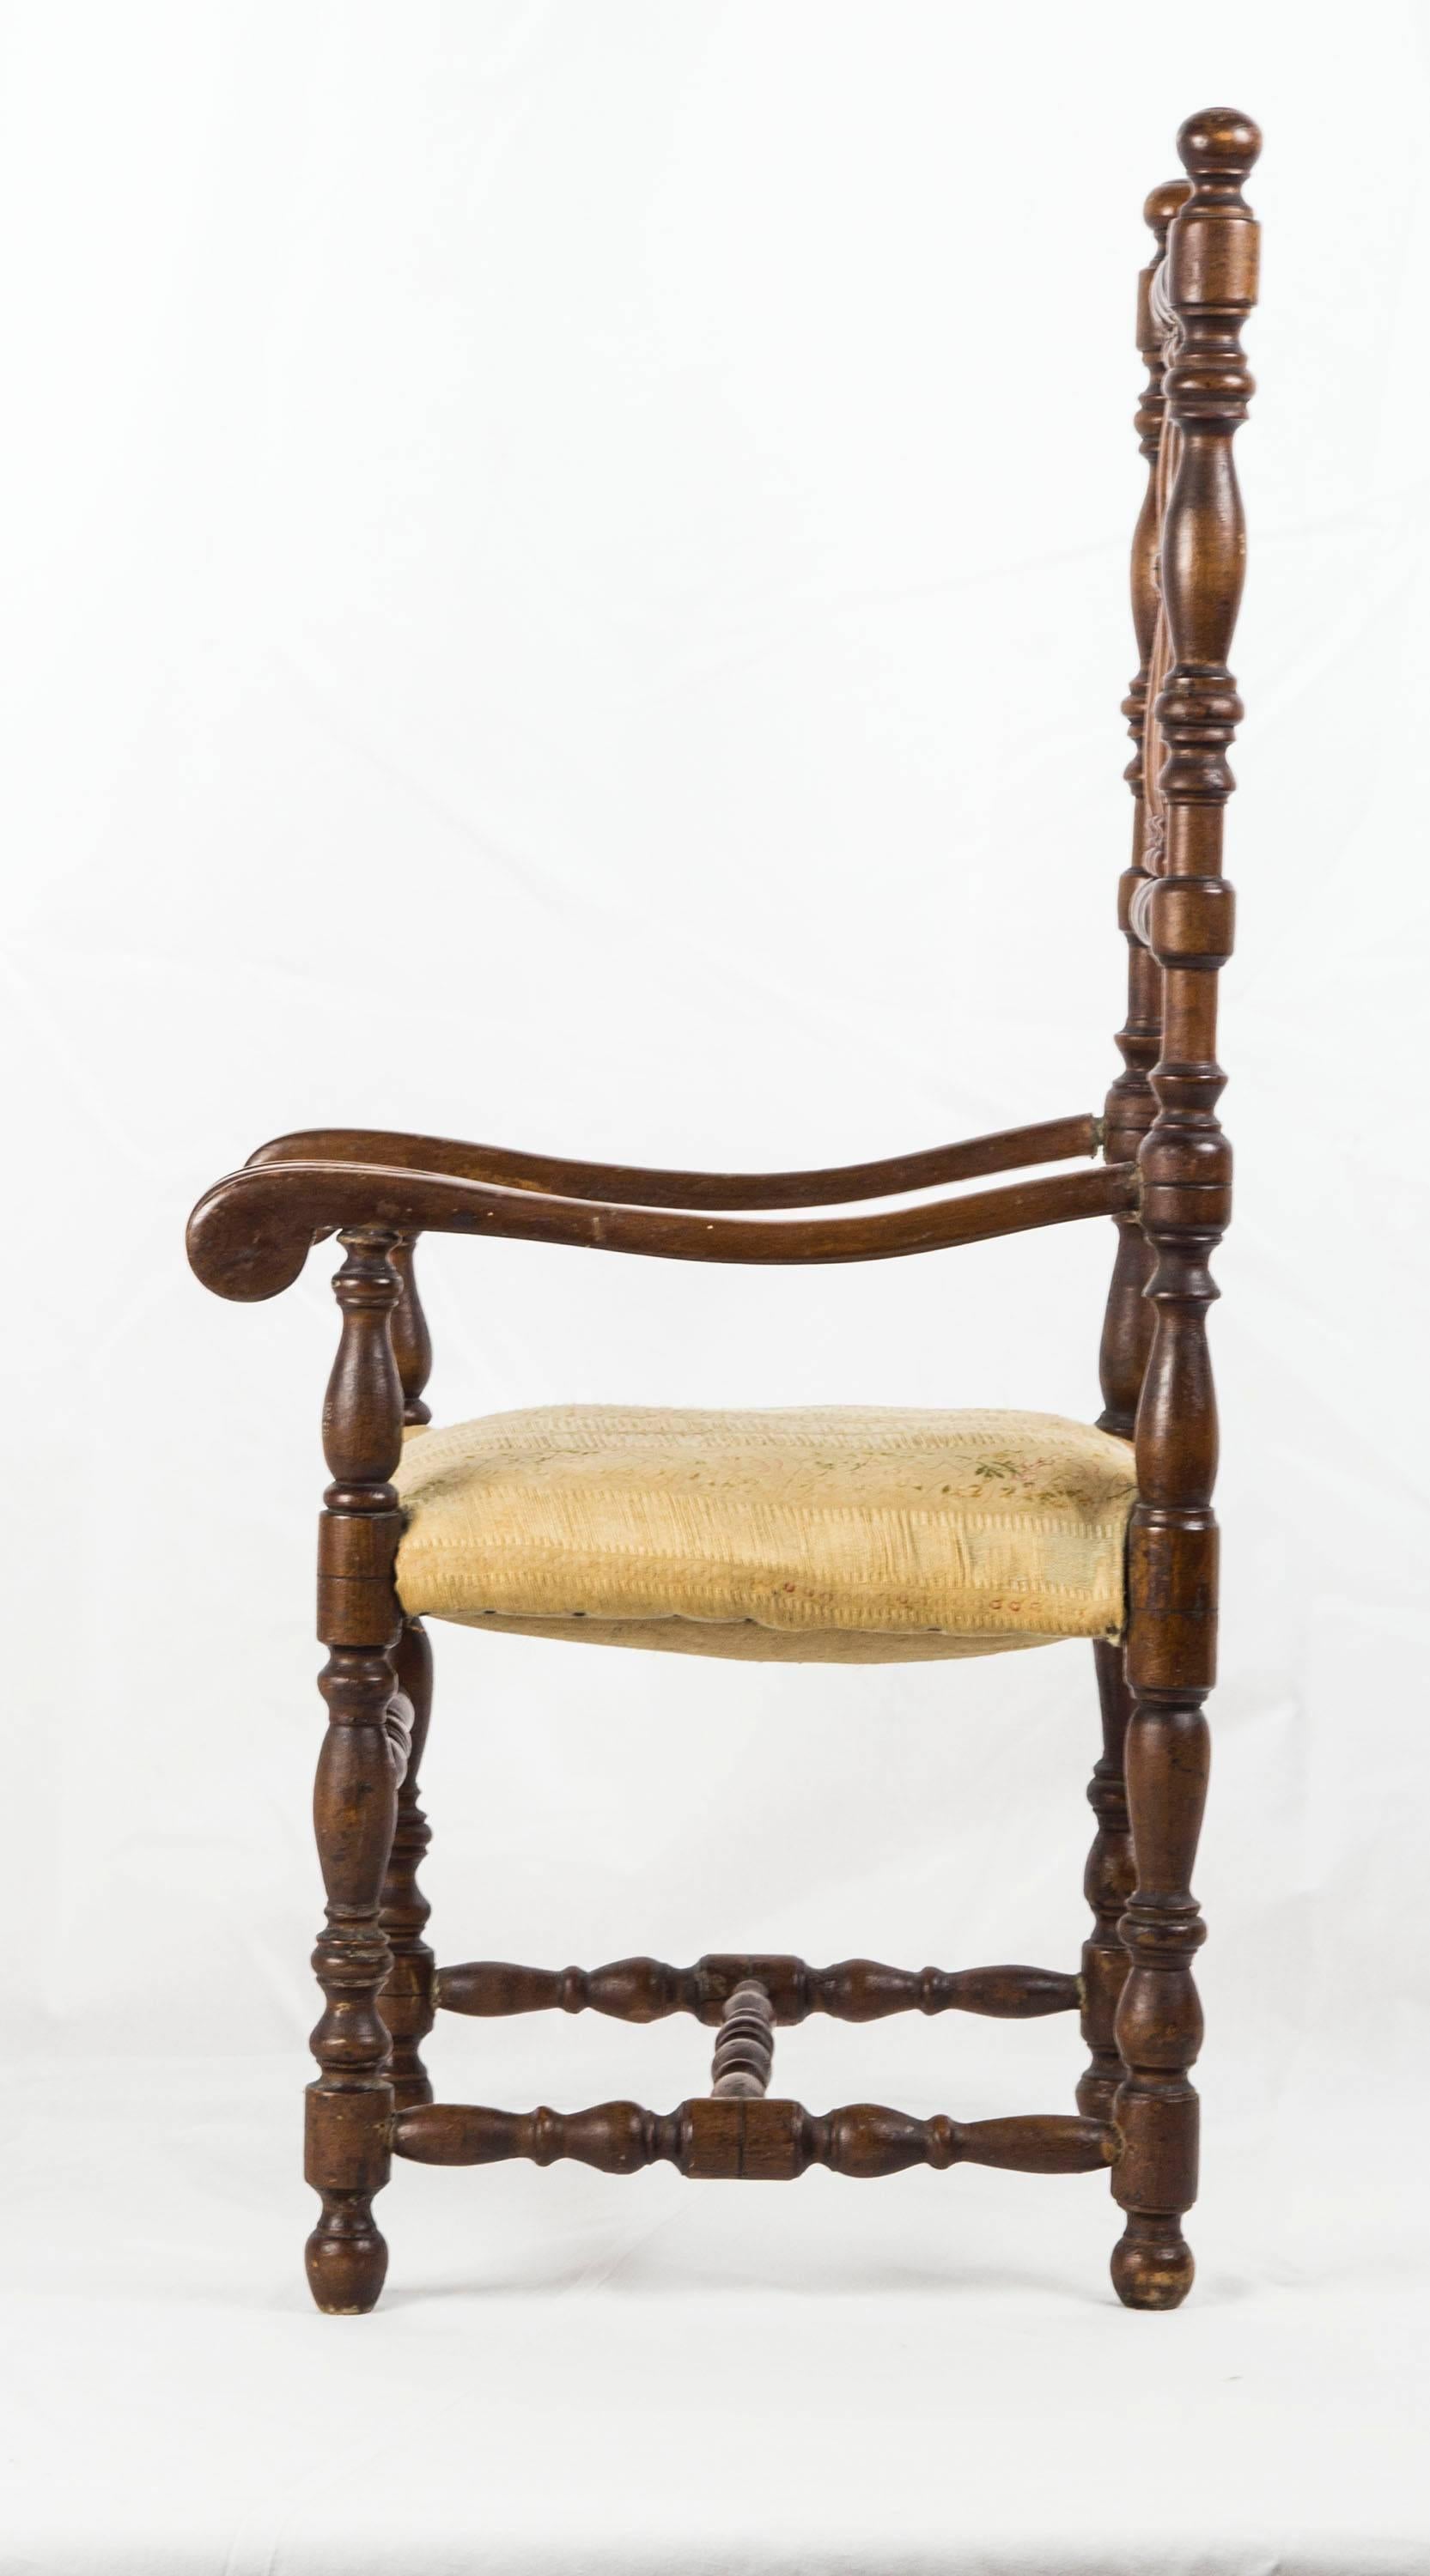 French Louis XIII style walnut open armchair with baluster turned spindle back over carved arms and raised on turned legs with H-stretcher; the seat is stuffed with horsehair and upholstered in yellow ribbon silk.